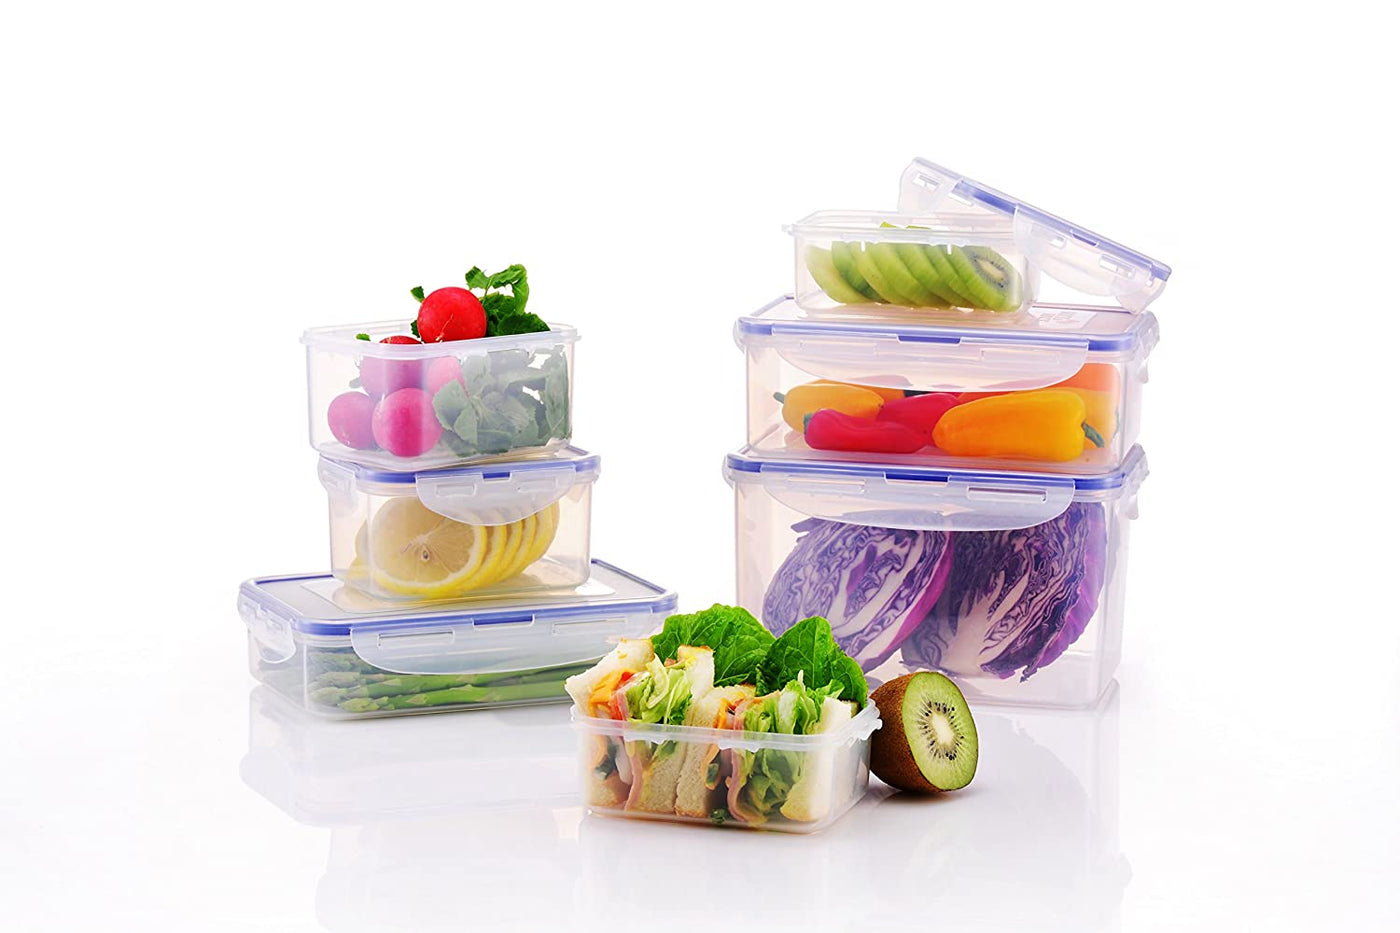 LocknLock Classics Rectangular Food Container with Leak Proof Locking Lid and Tray (Transparent, 1 L)